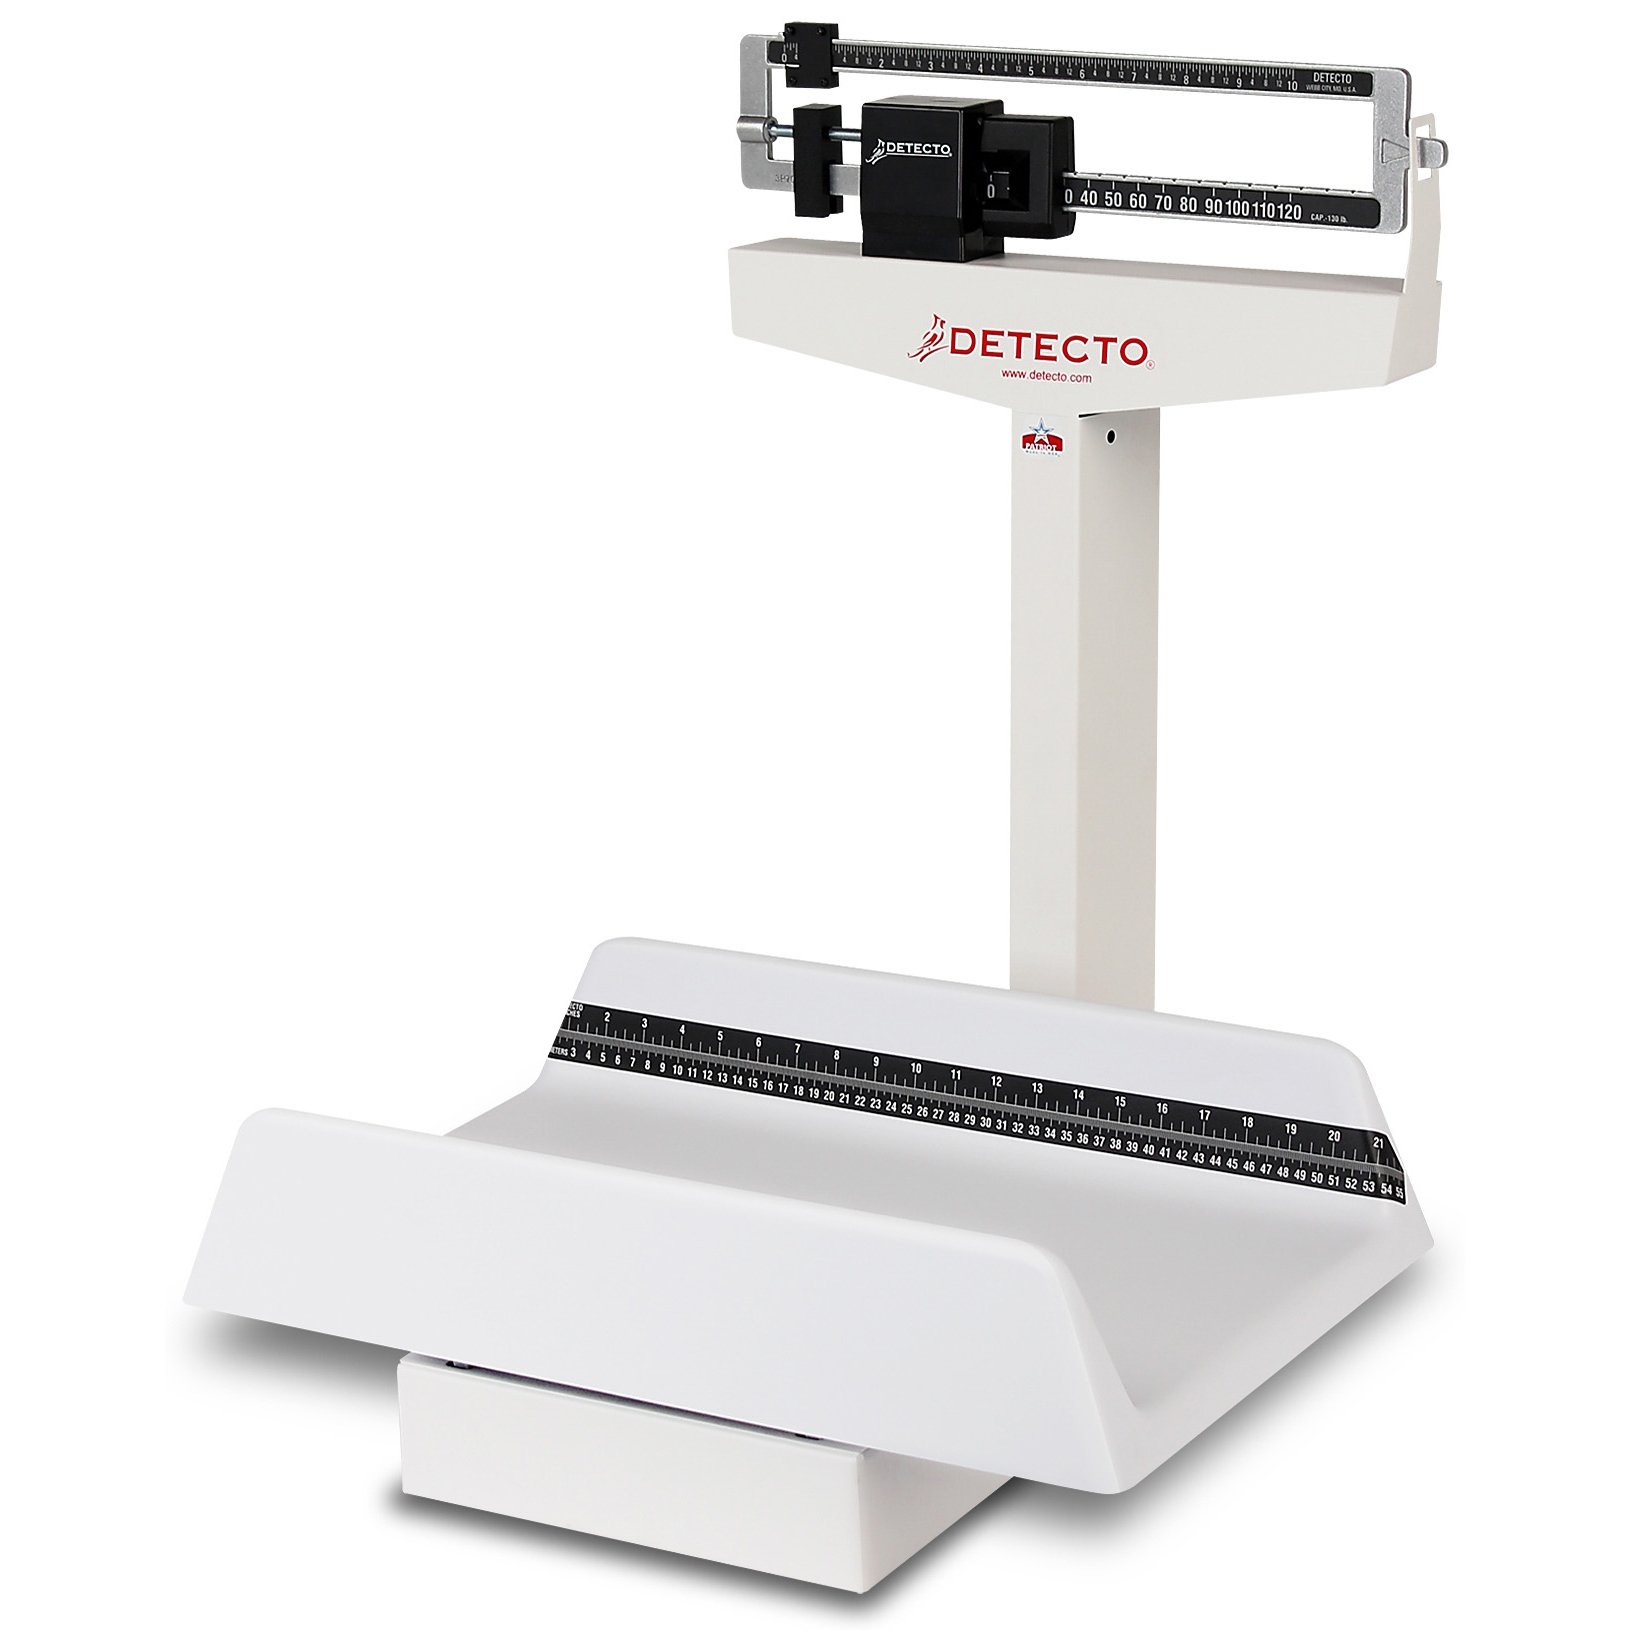 Compact baby scale - All medical device manufacturers